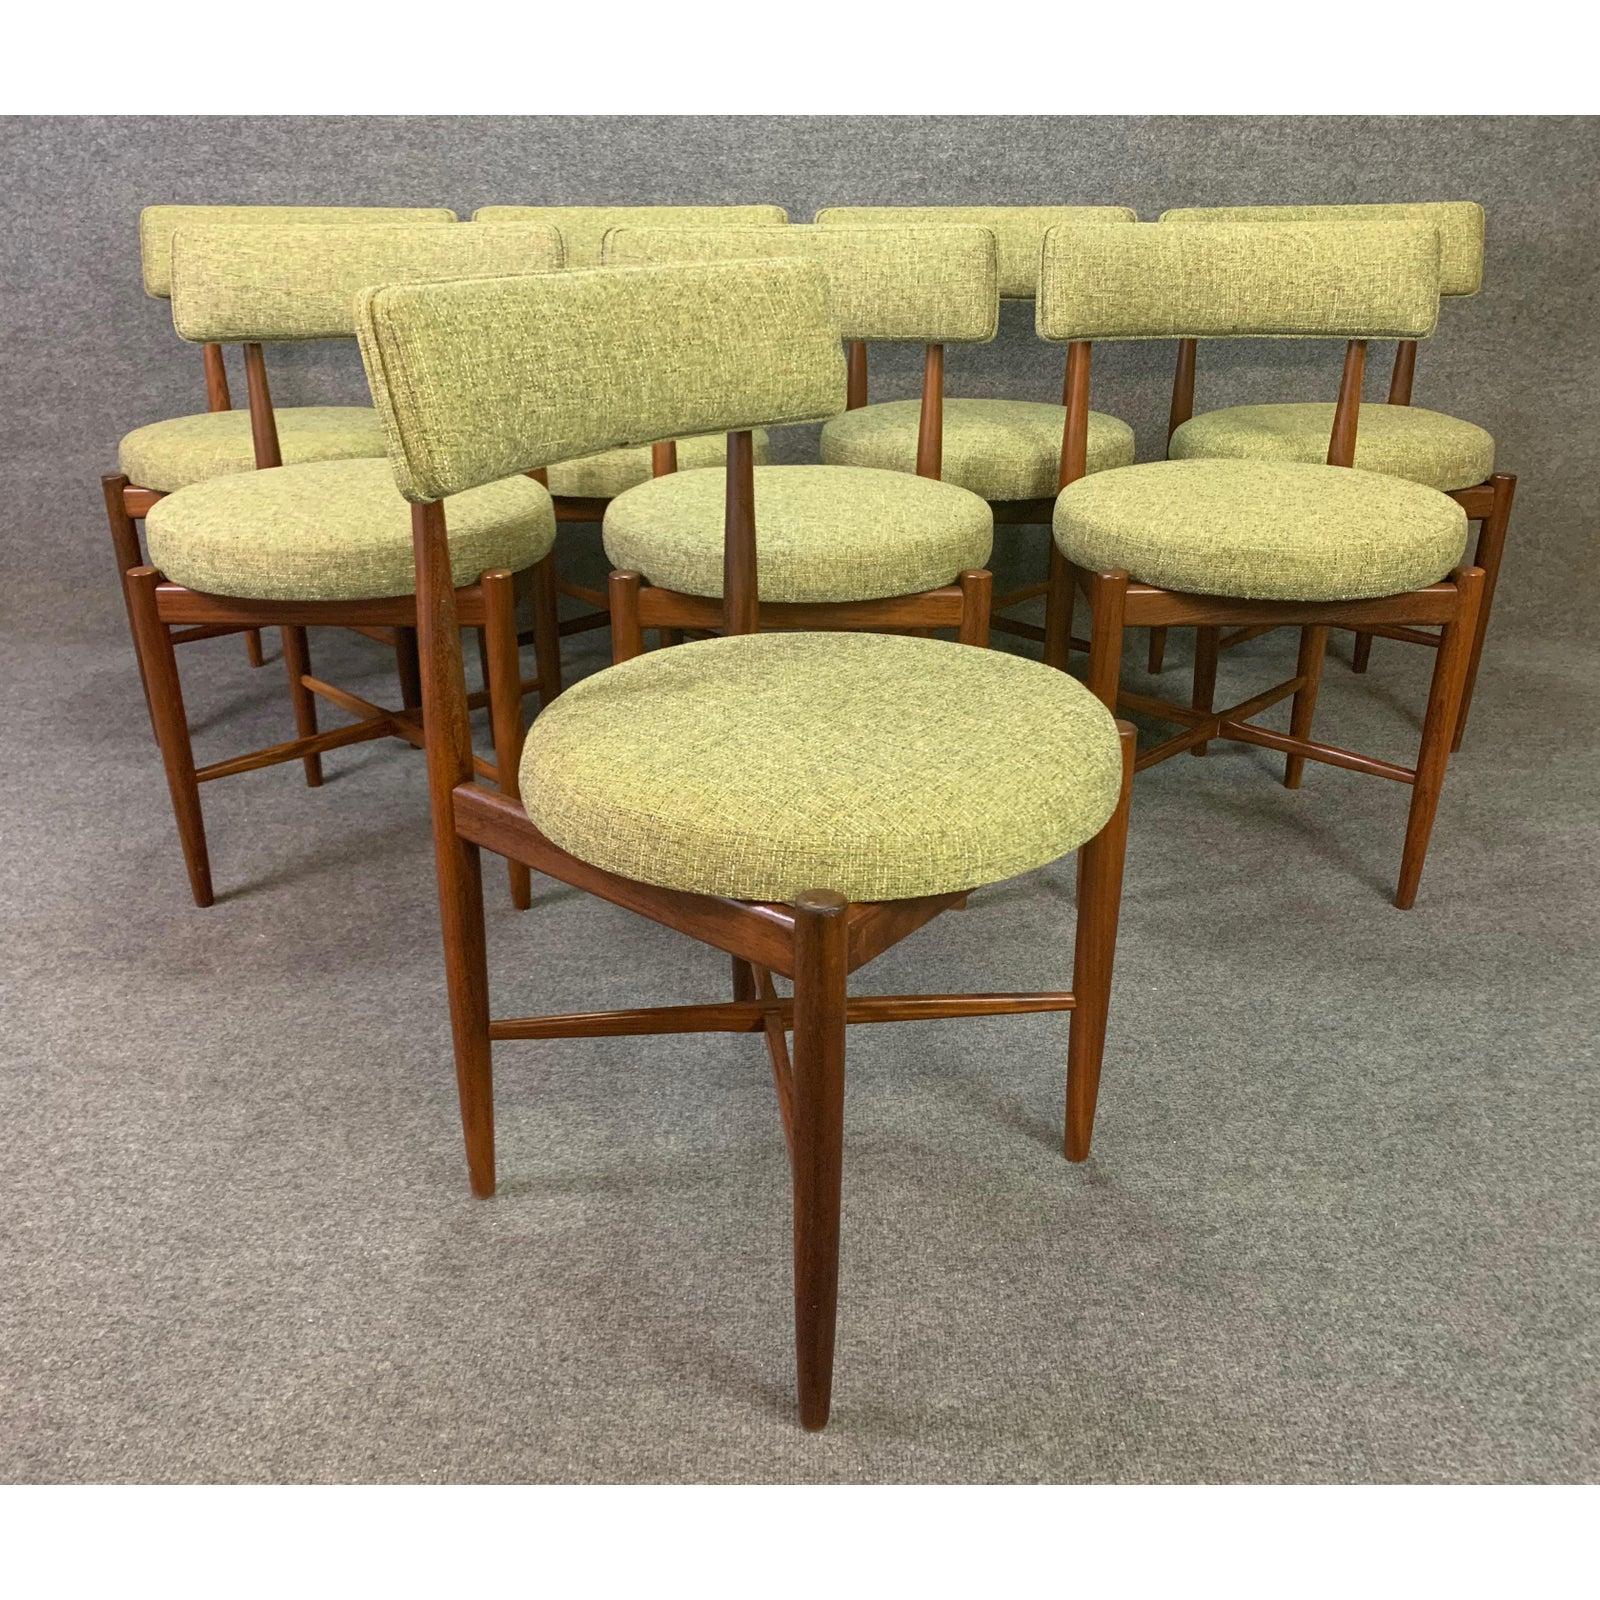 Here is an exquisite set of eight vintage dining chairs in teak wood designed by Victor Wilkins and manufactured in England in the 1960s.
These lovely and comfortable chairs set, recently imported form the UK to California before their restoration,